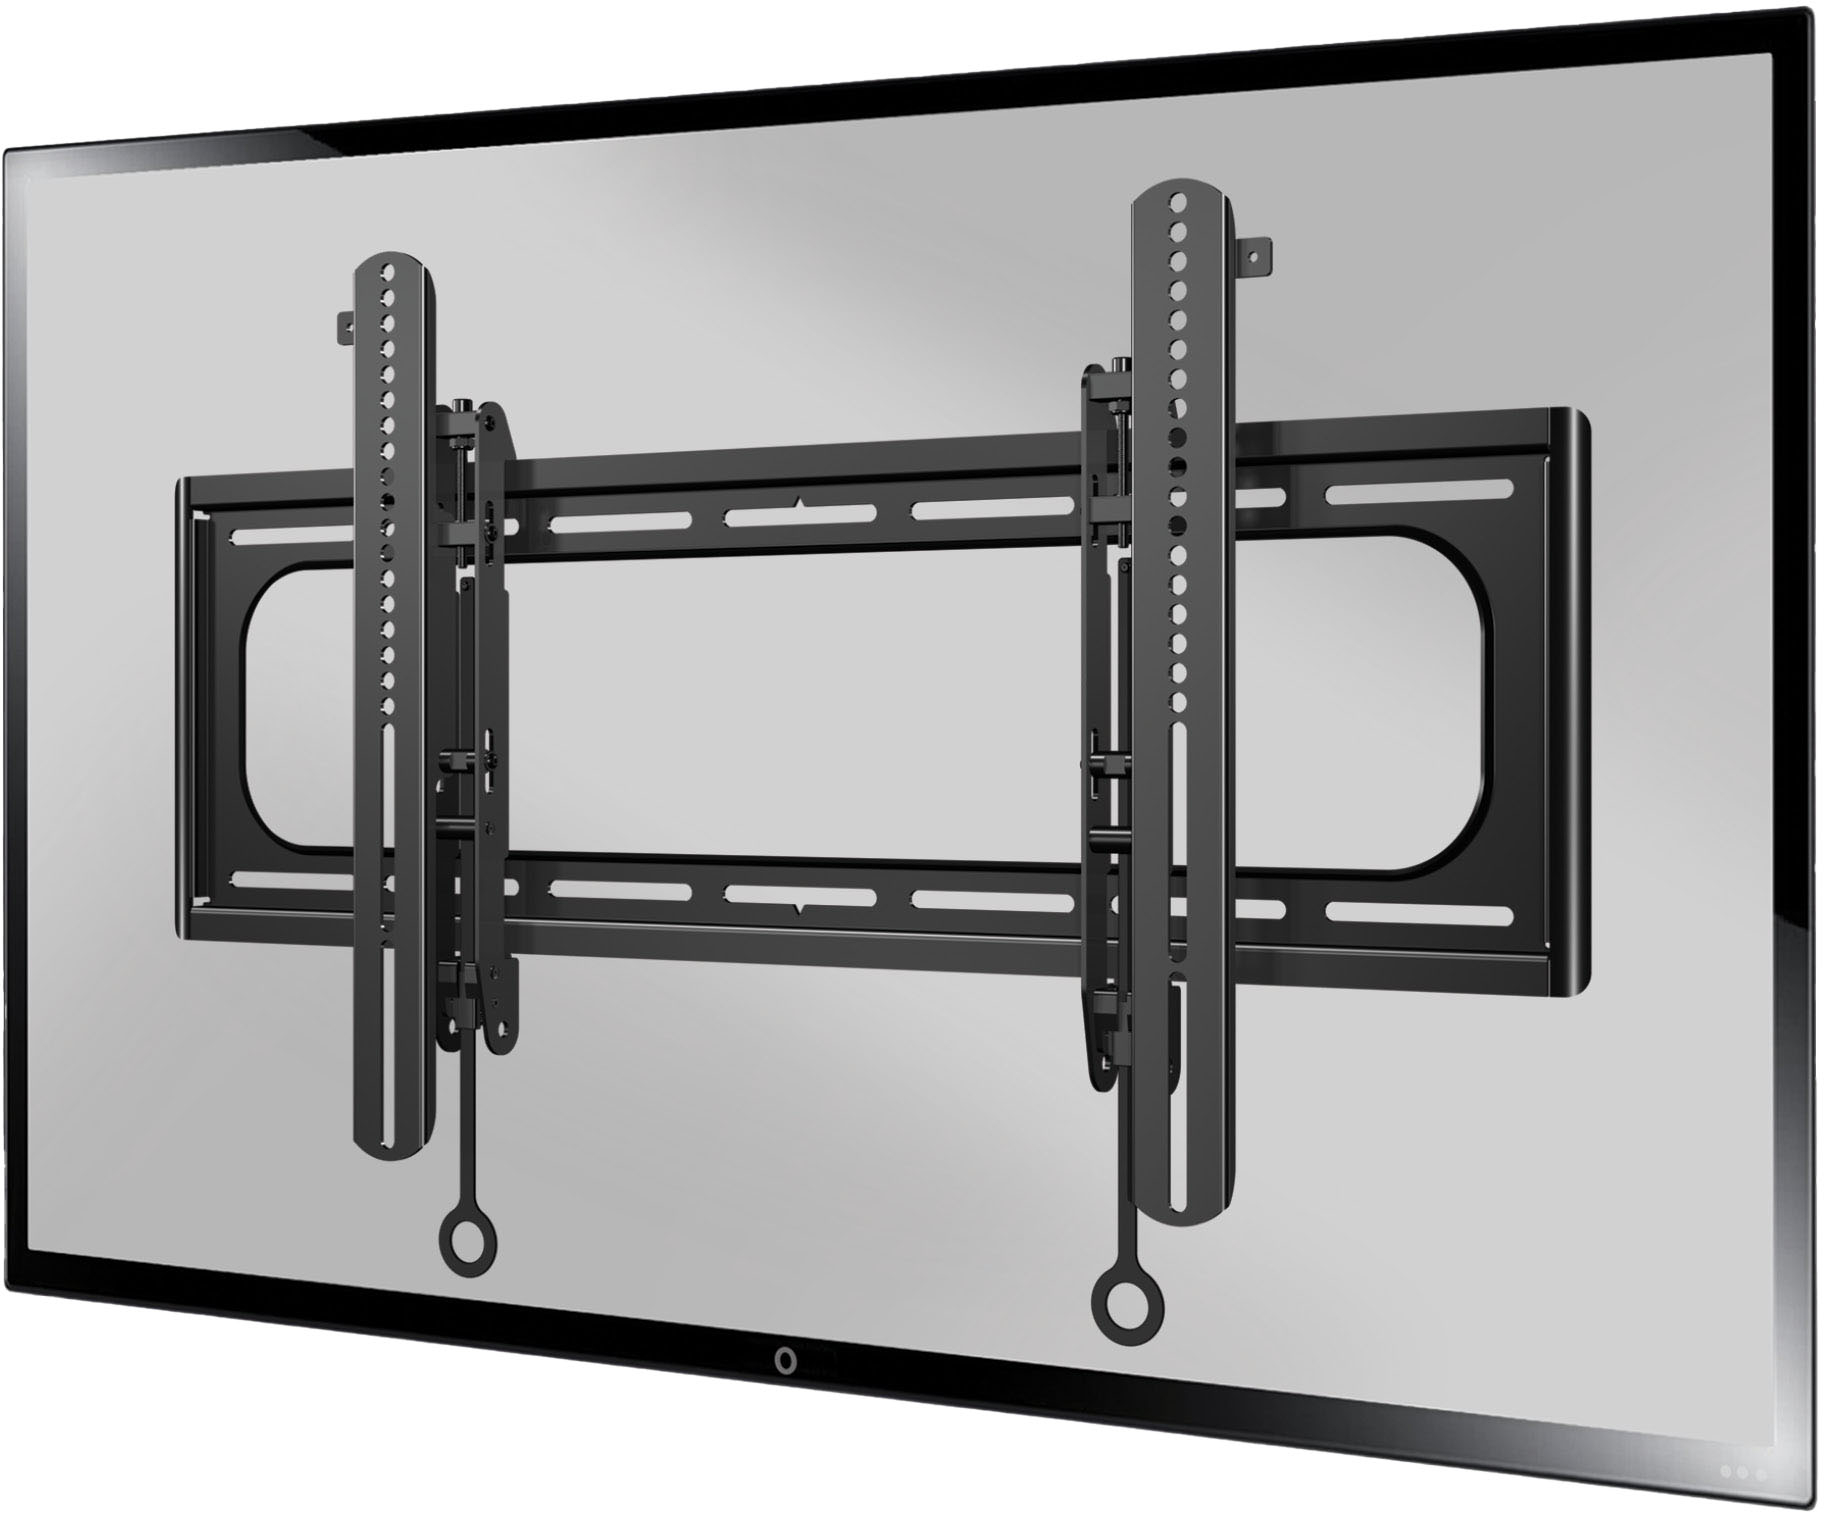 Sanus - Premium Series Fixed-Position  TV Wall Mount for Most TVs 65"-95" up to 180 lbs - Slim Profile Sits 1.6" From Wall - Black